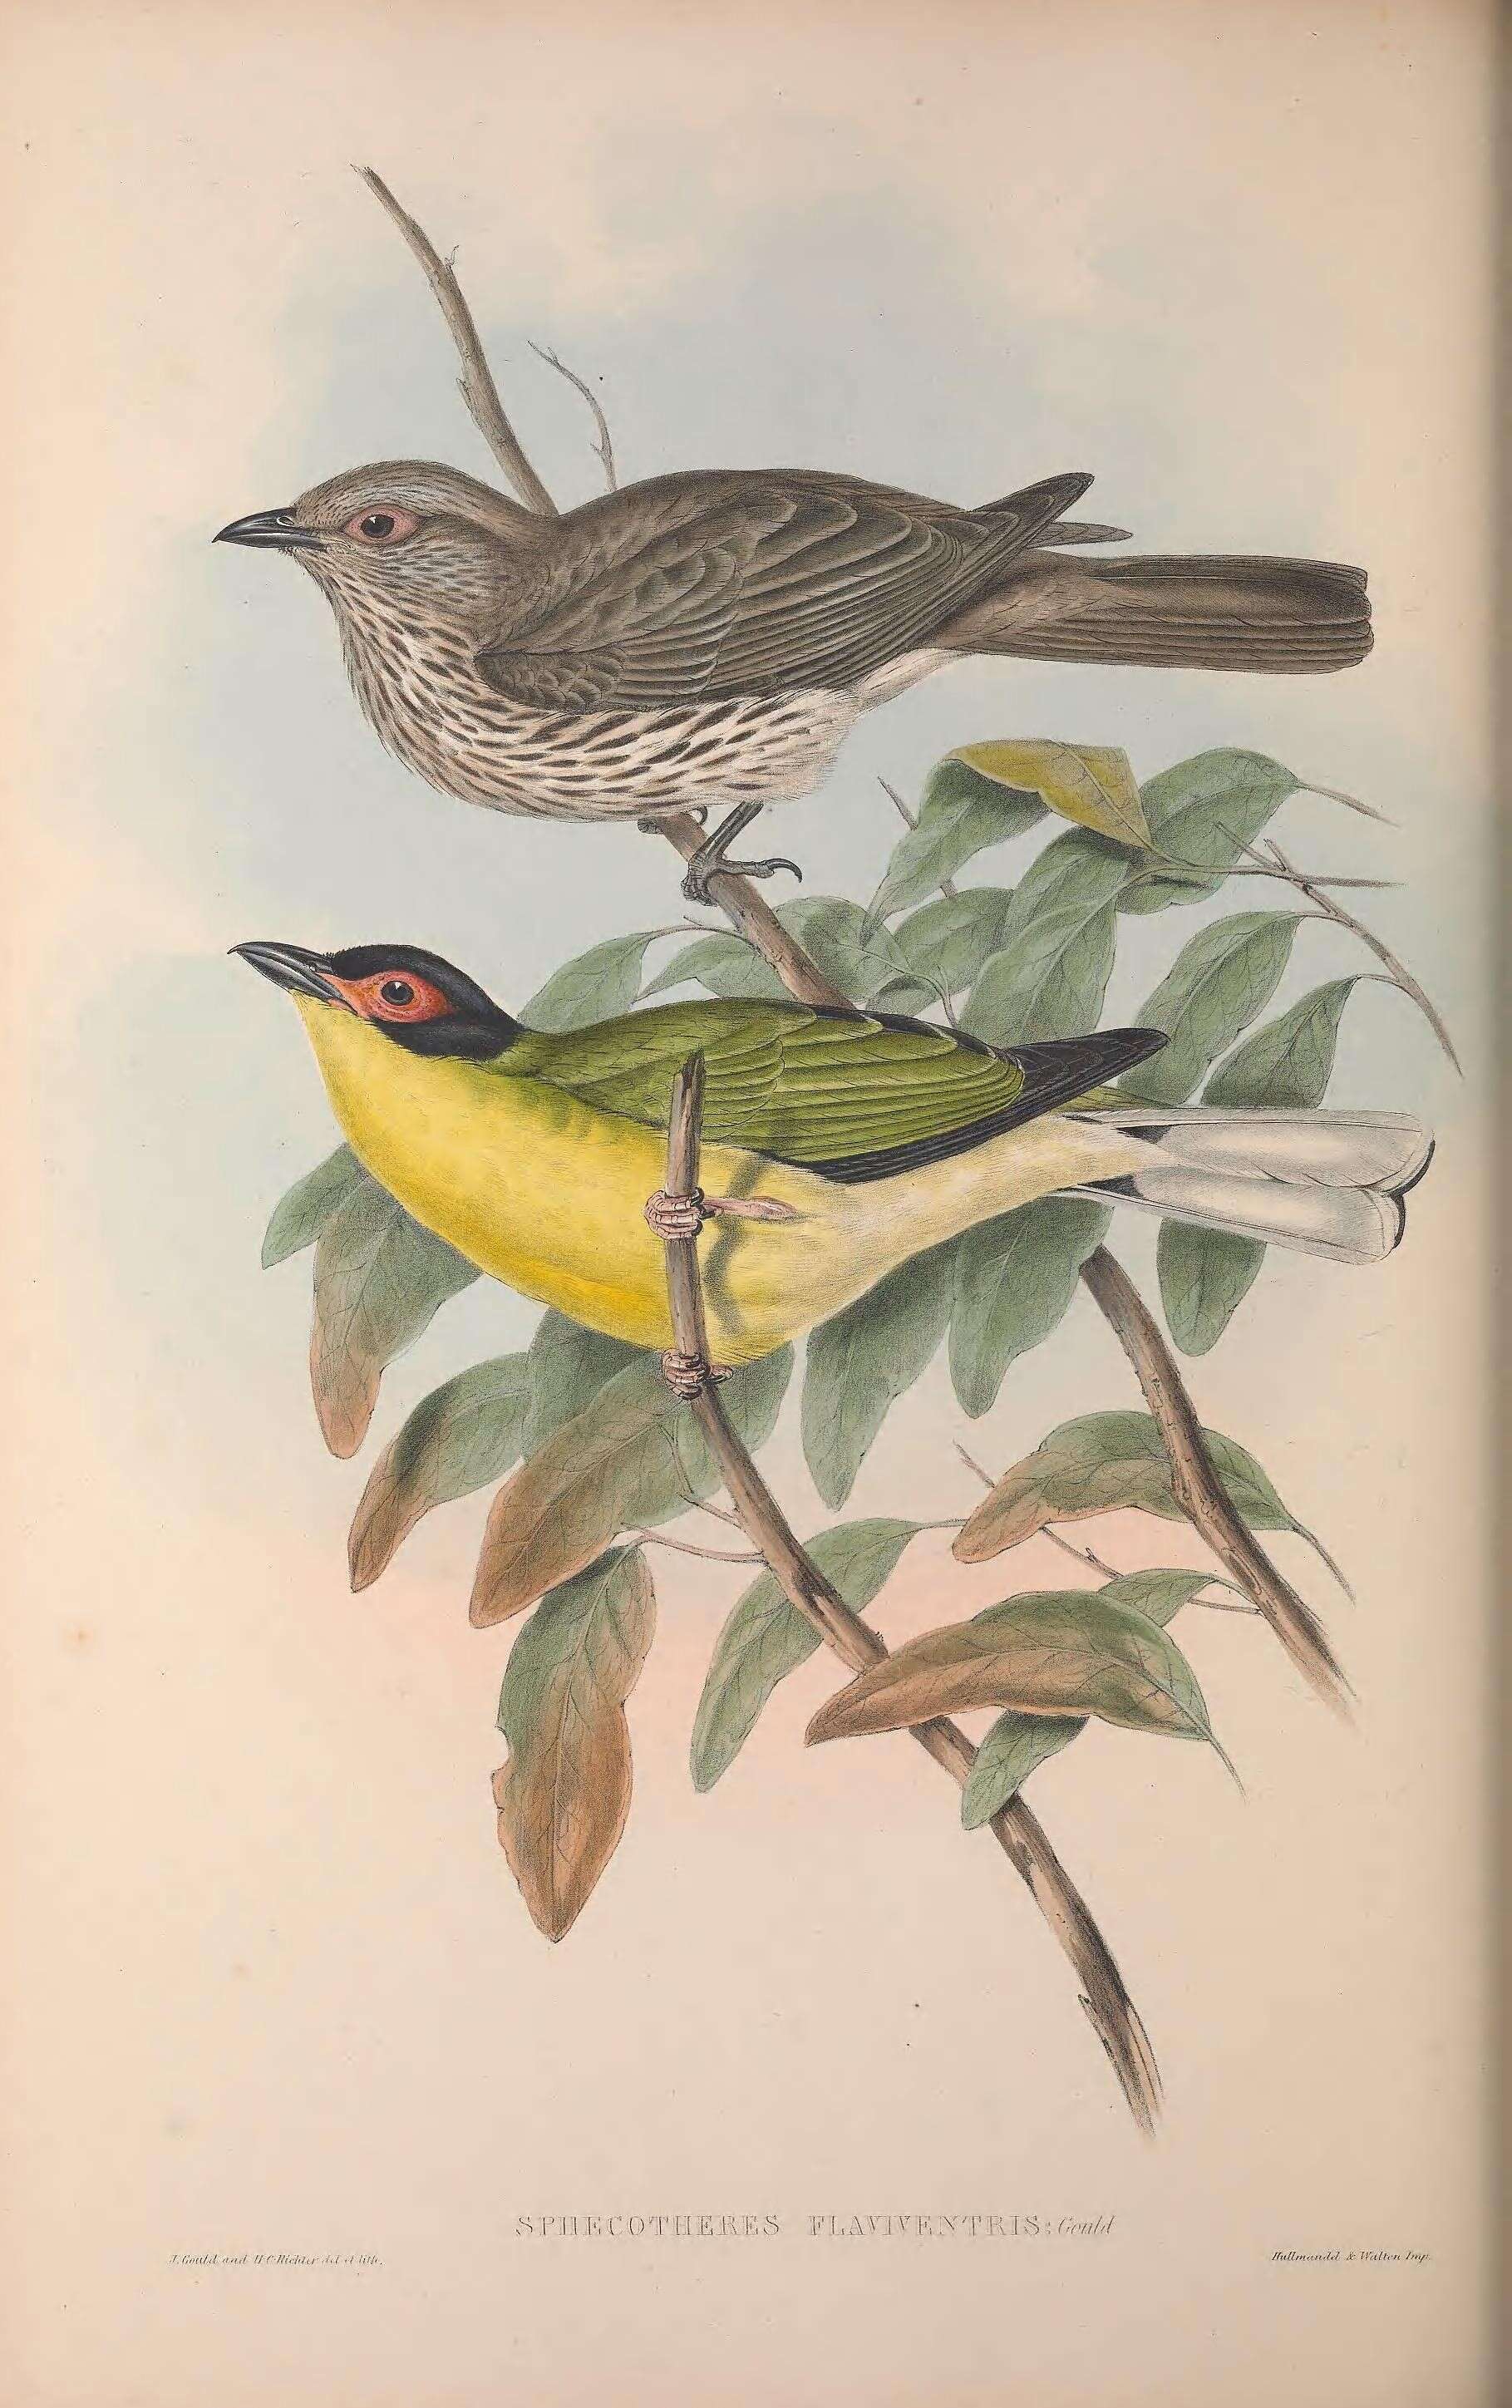 Image of Sphecotheres Vieillot 1816